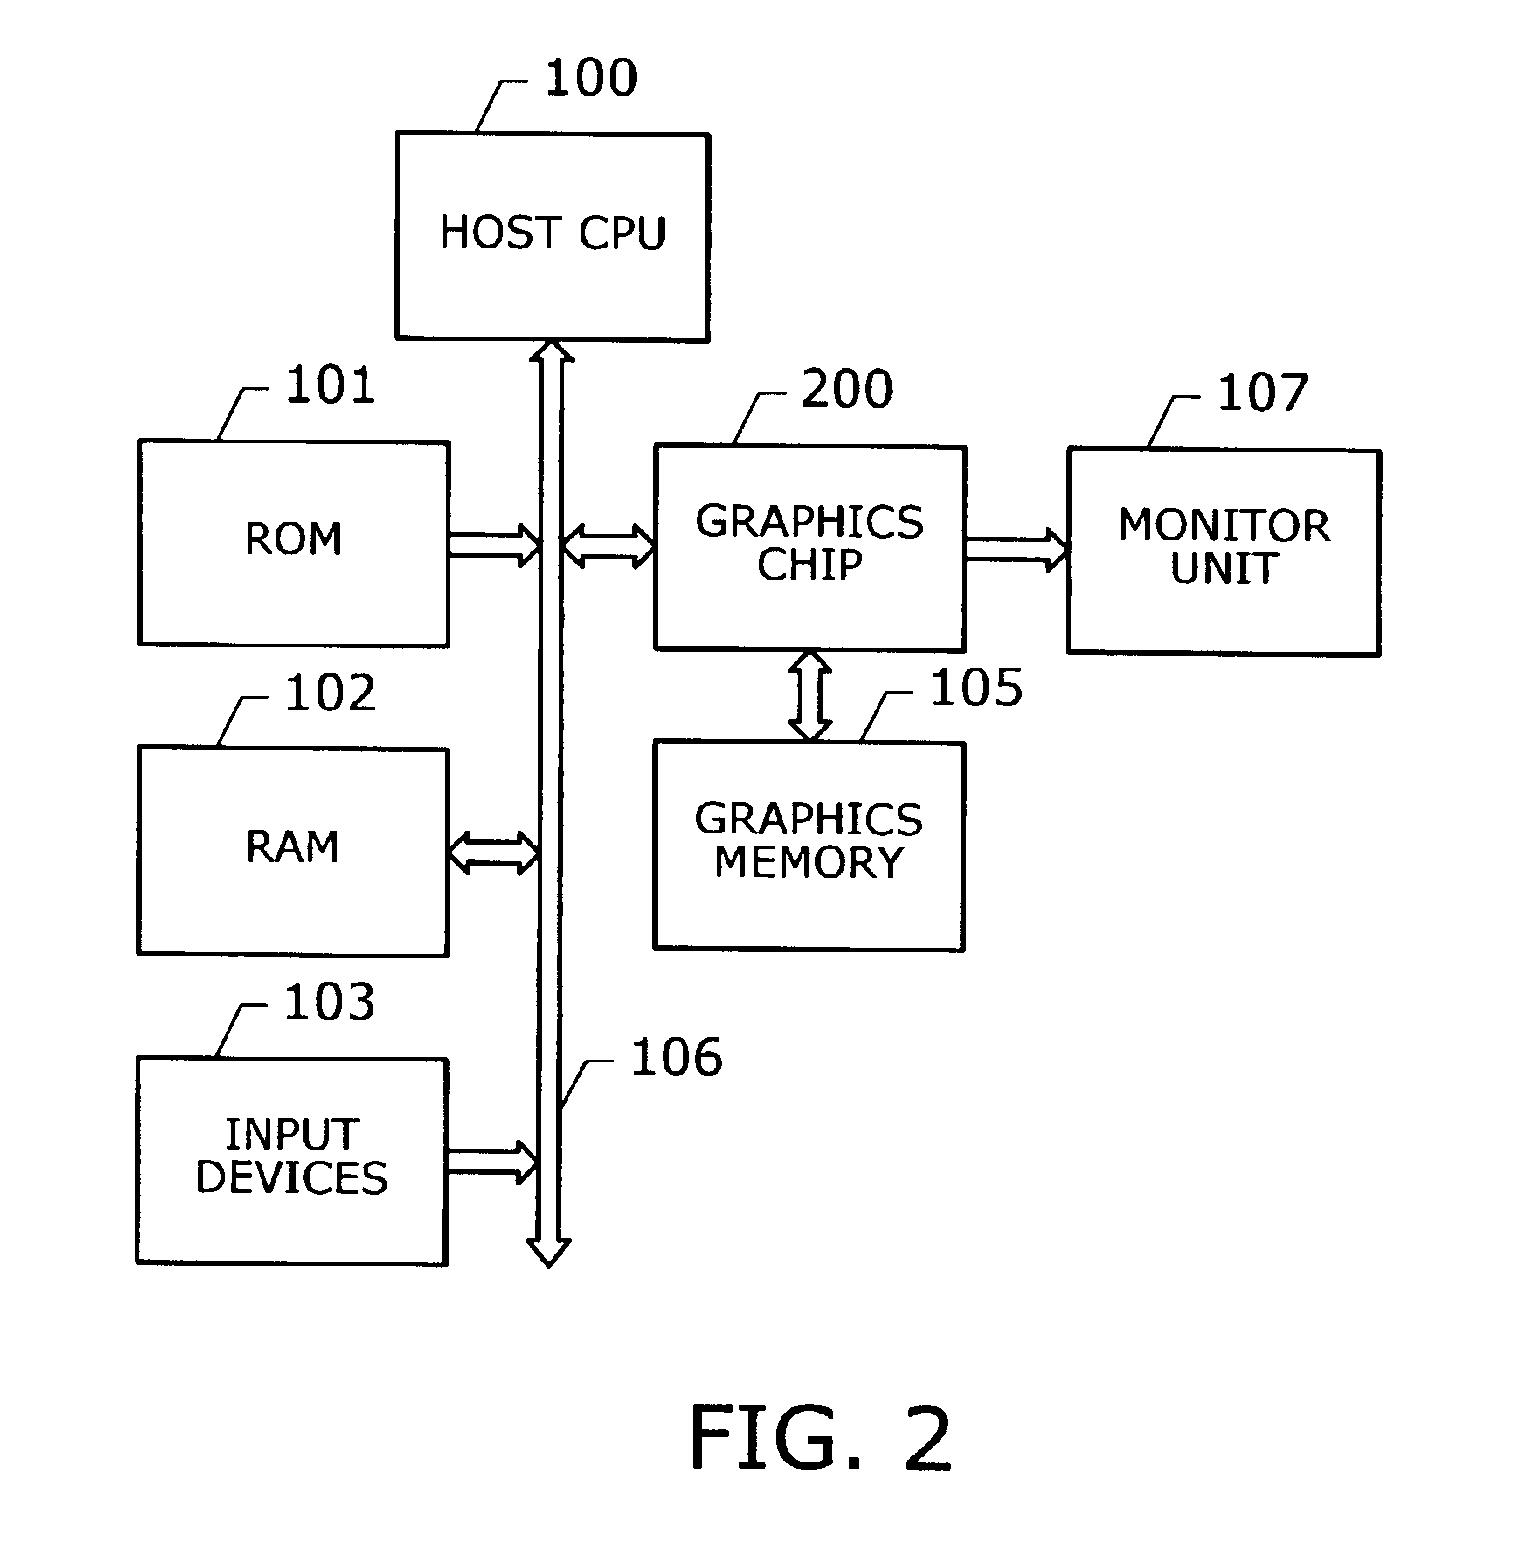 Image processing device for layered graphics